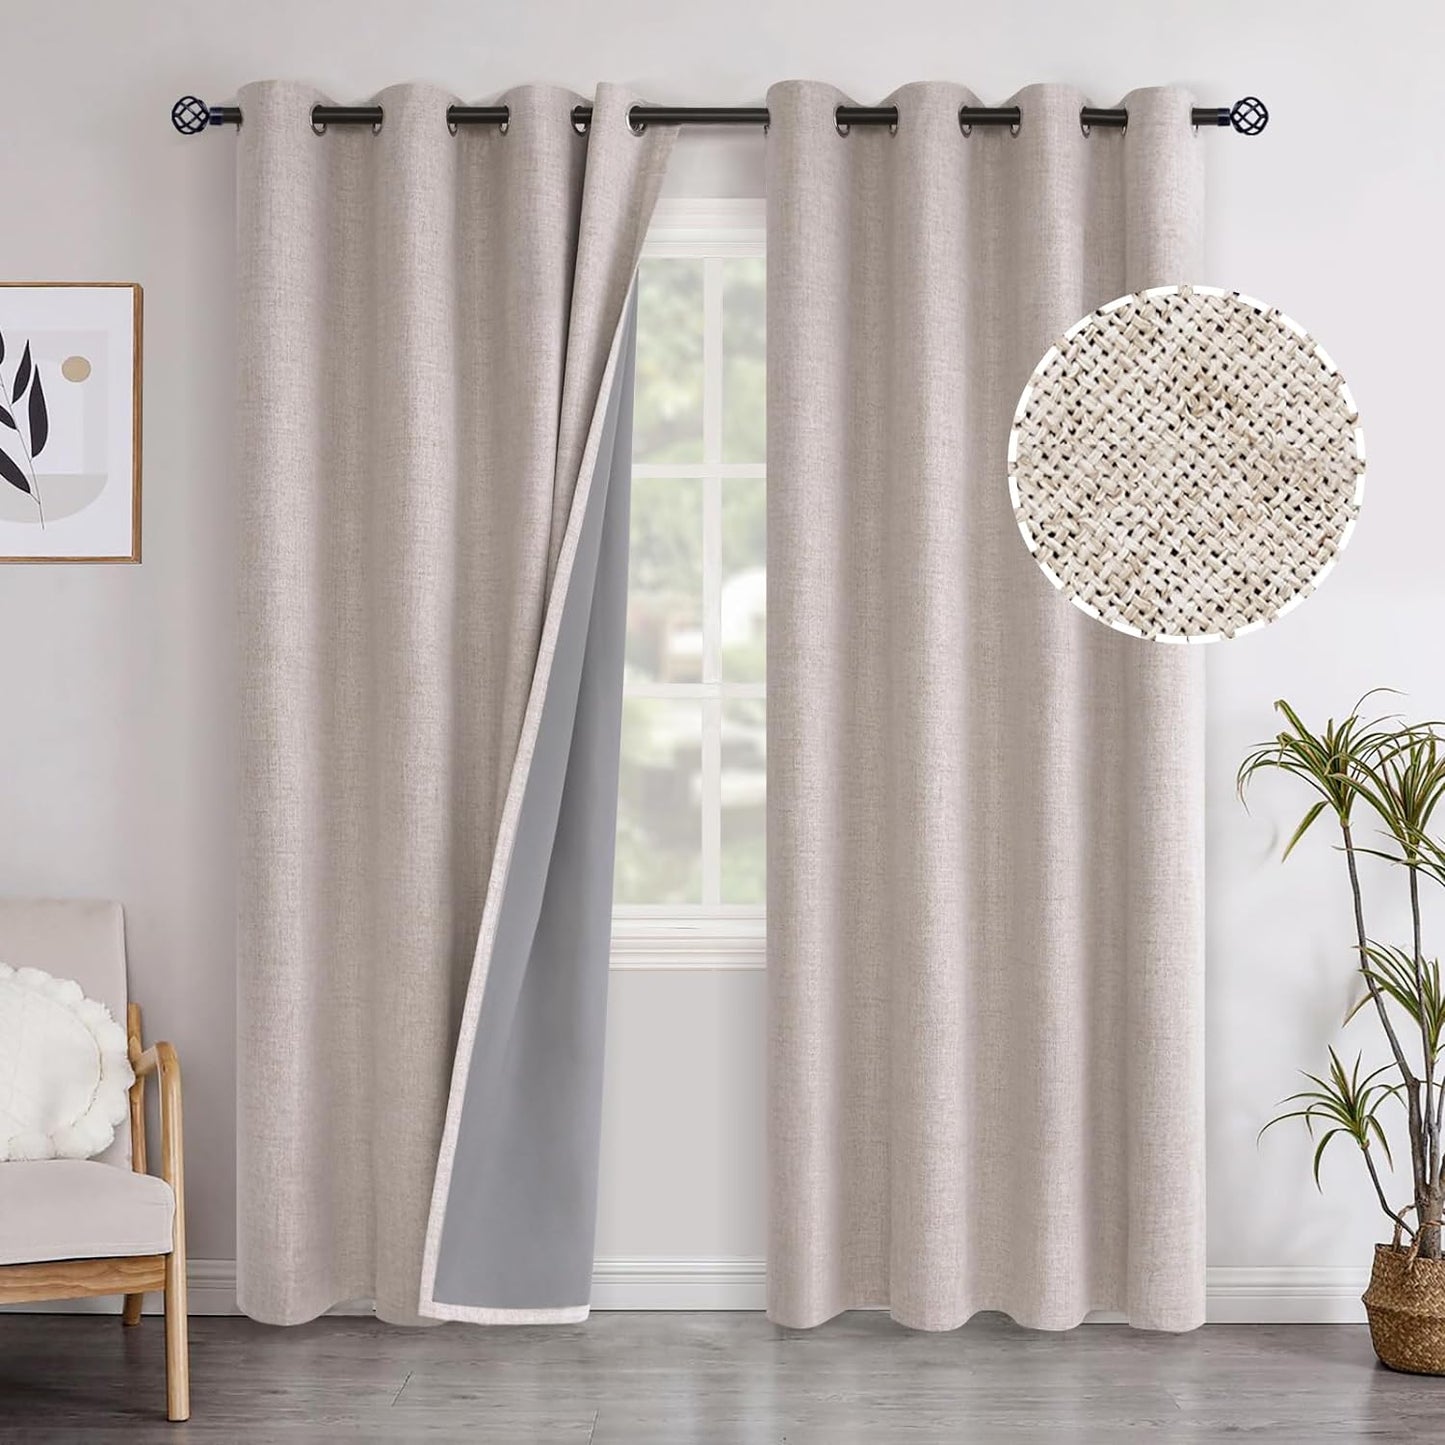 Youngstex Linen Blackout Curtains 63 Inch Length, Grommet Darkening Bedroom Curtains Burlap Linen Window Drapes Thermal Insulated for Basement Summer Heat, 2 Panels, 52 X 63 Inch, Beige  YoungsTex Beige 52W X 90L 